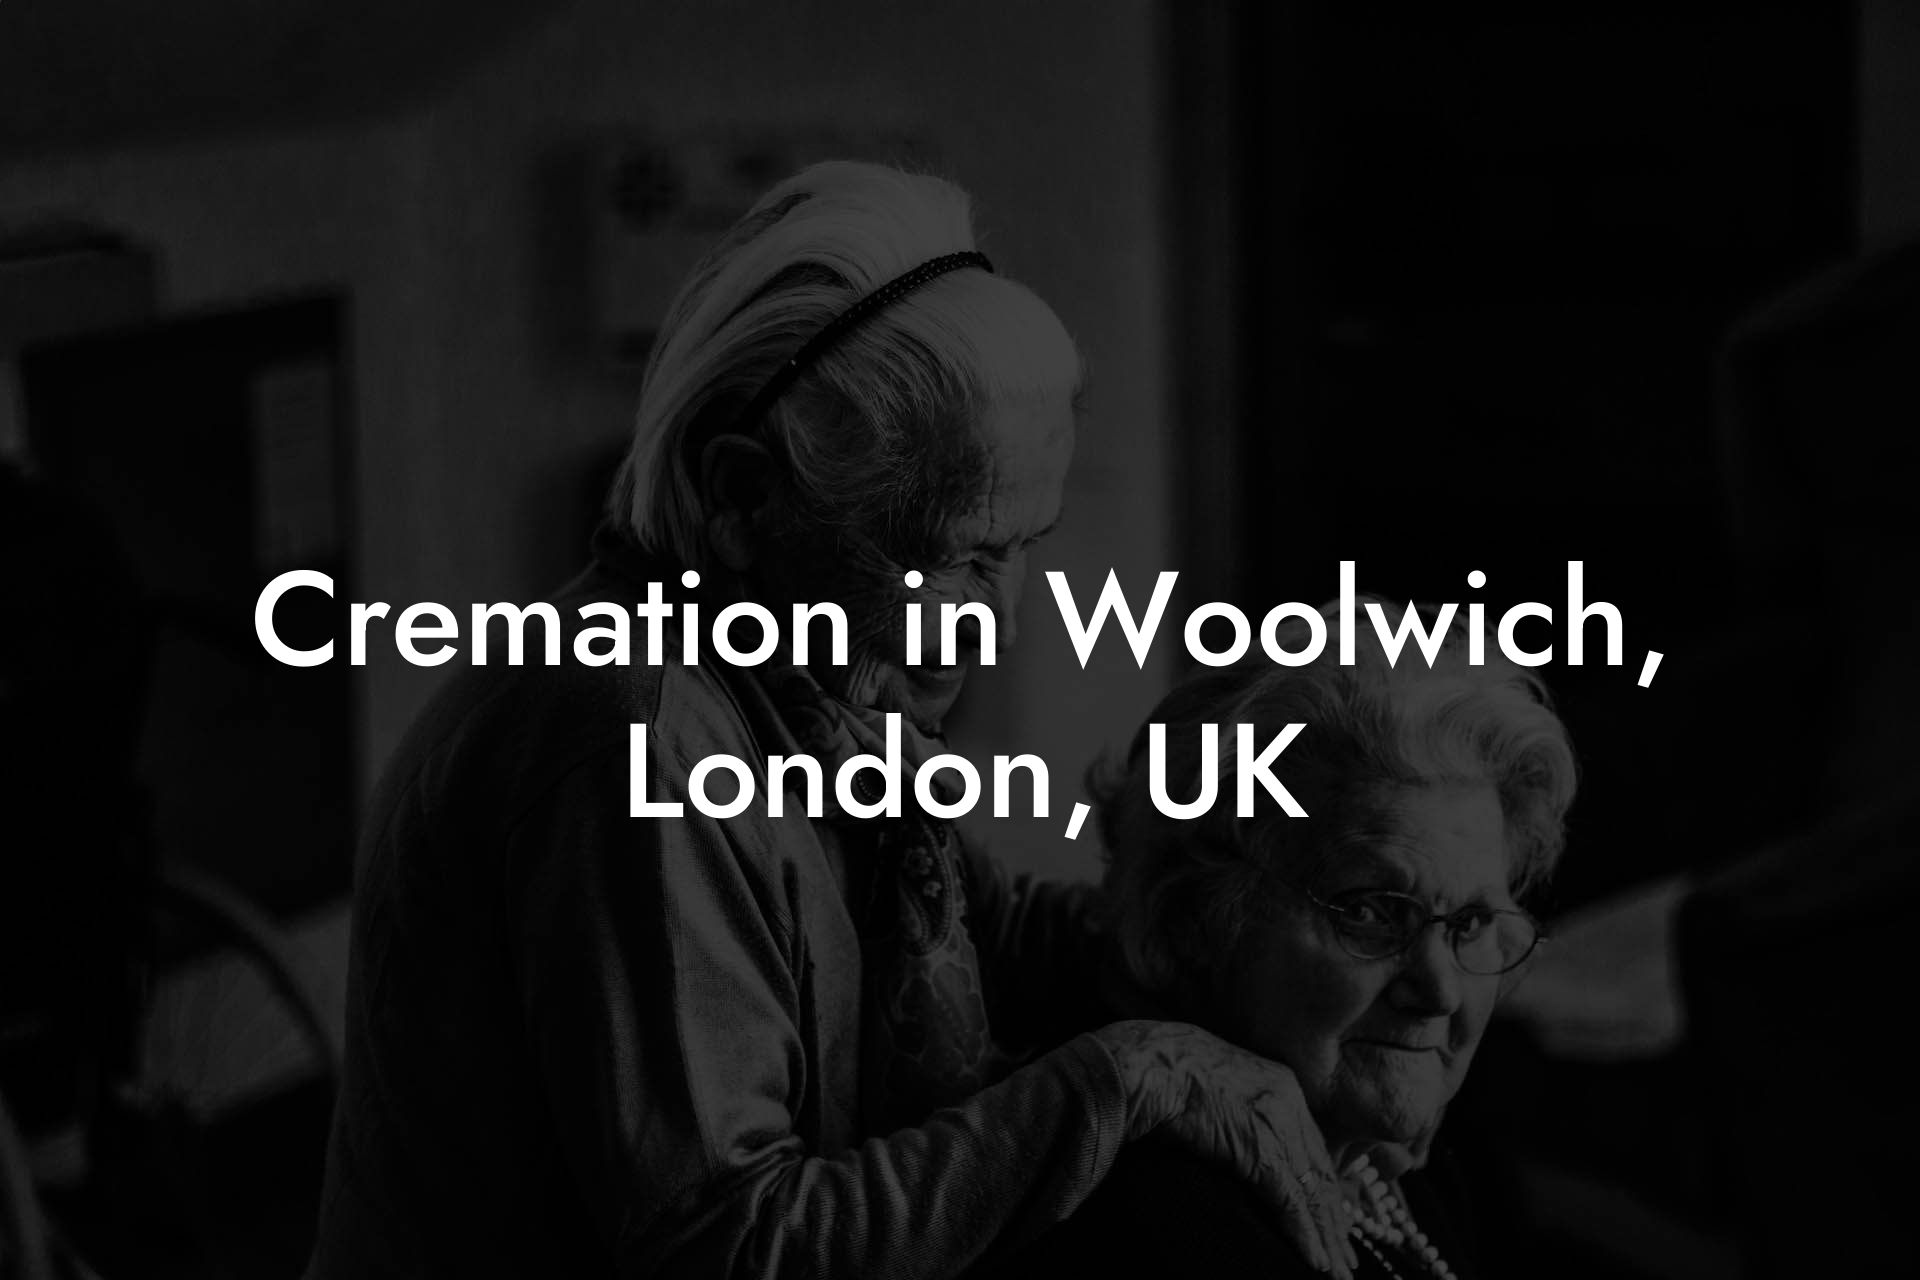 Cremation in Woolwich, London, UK